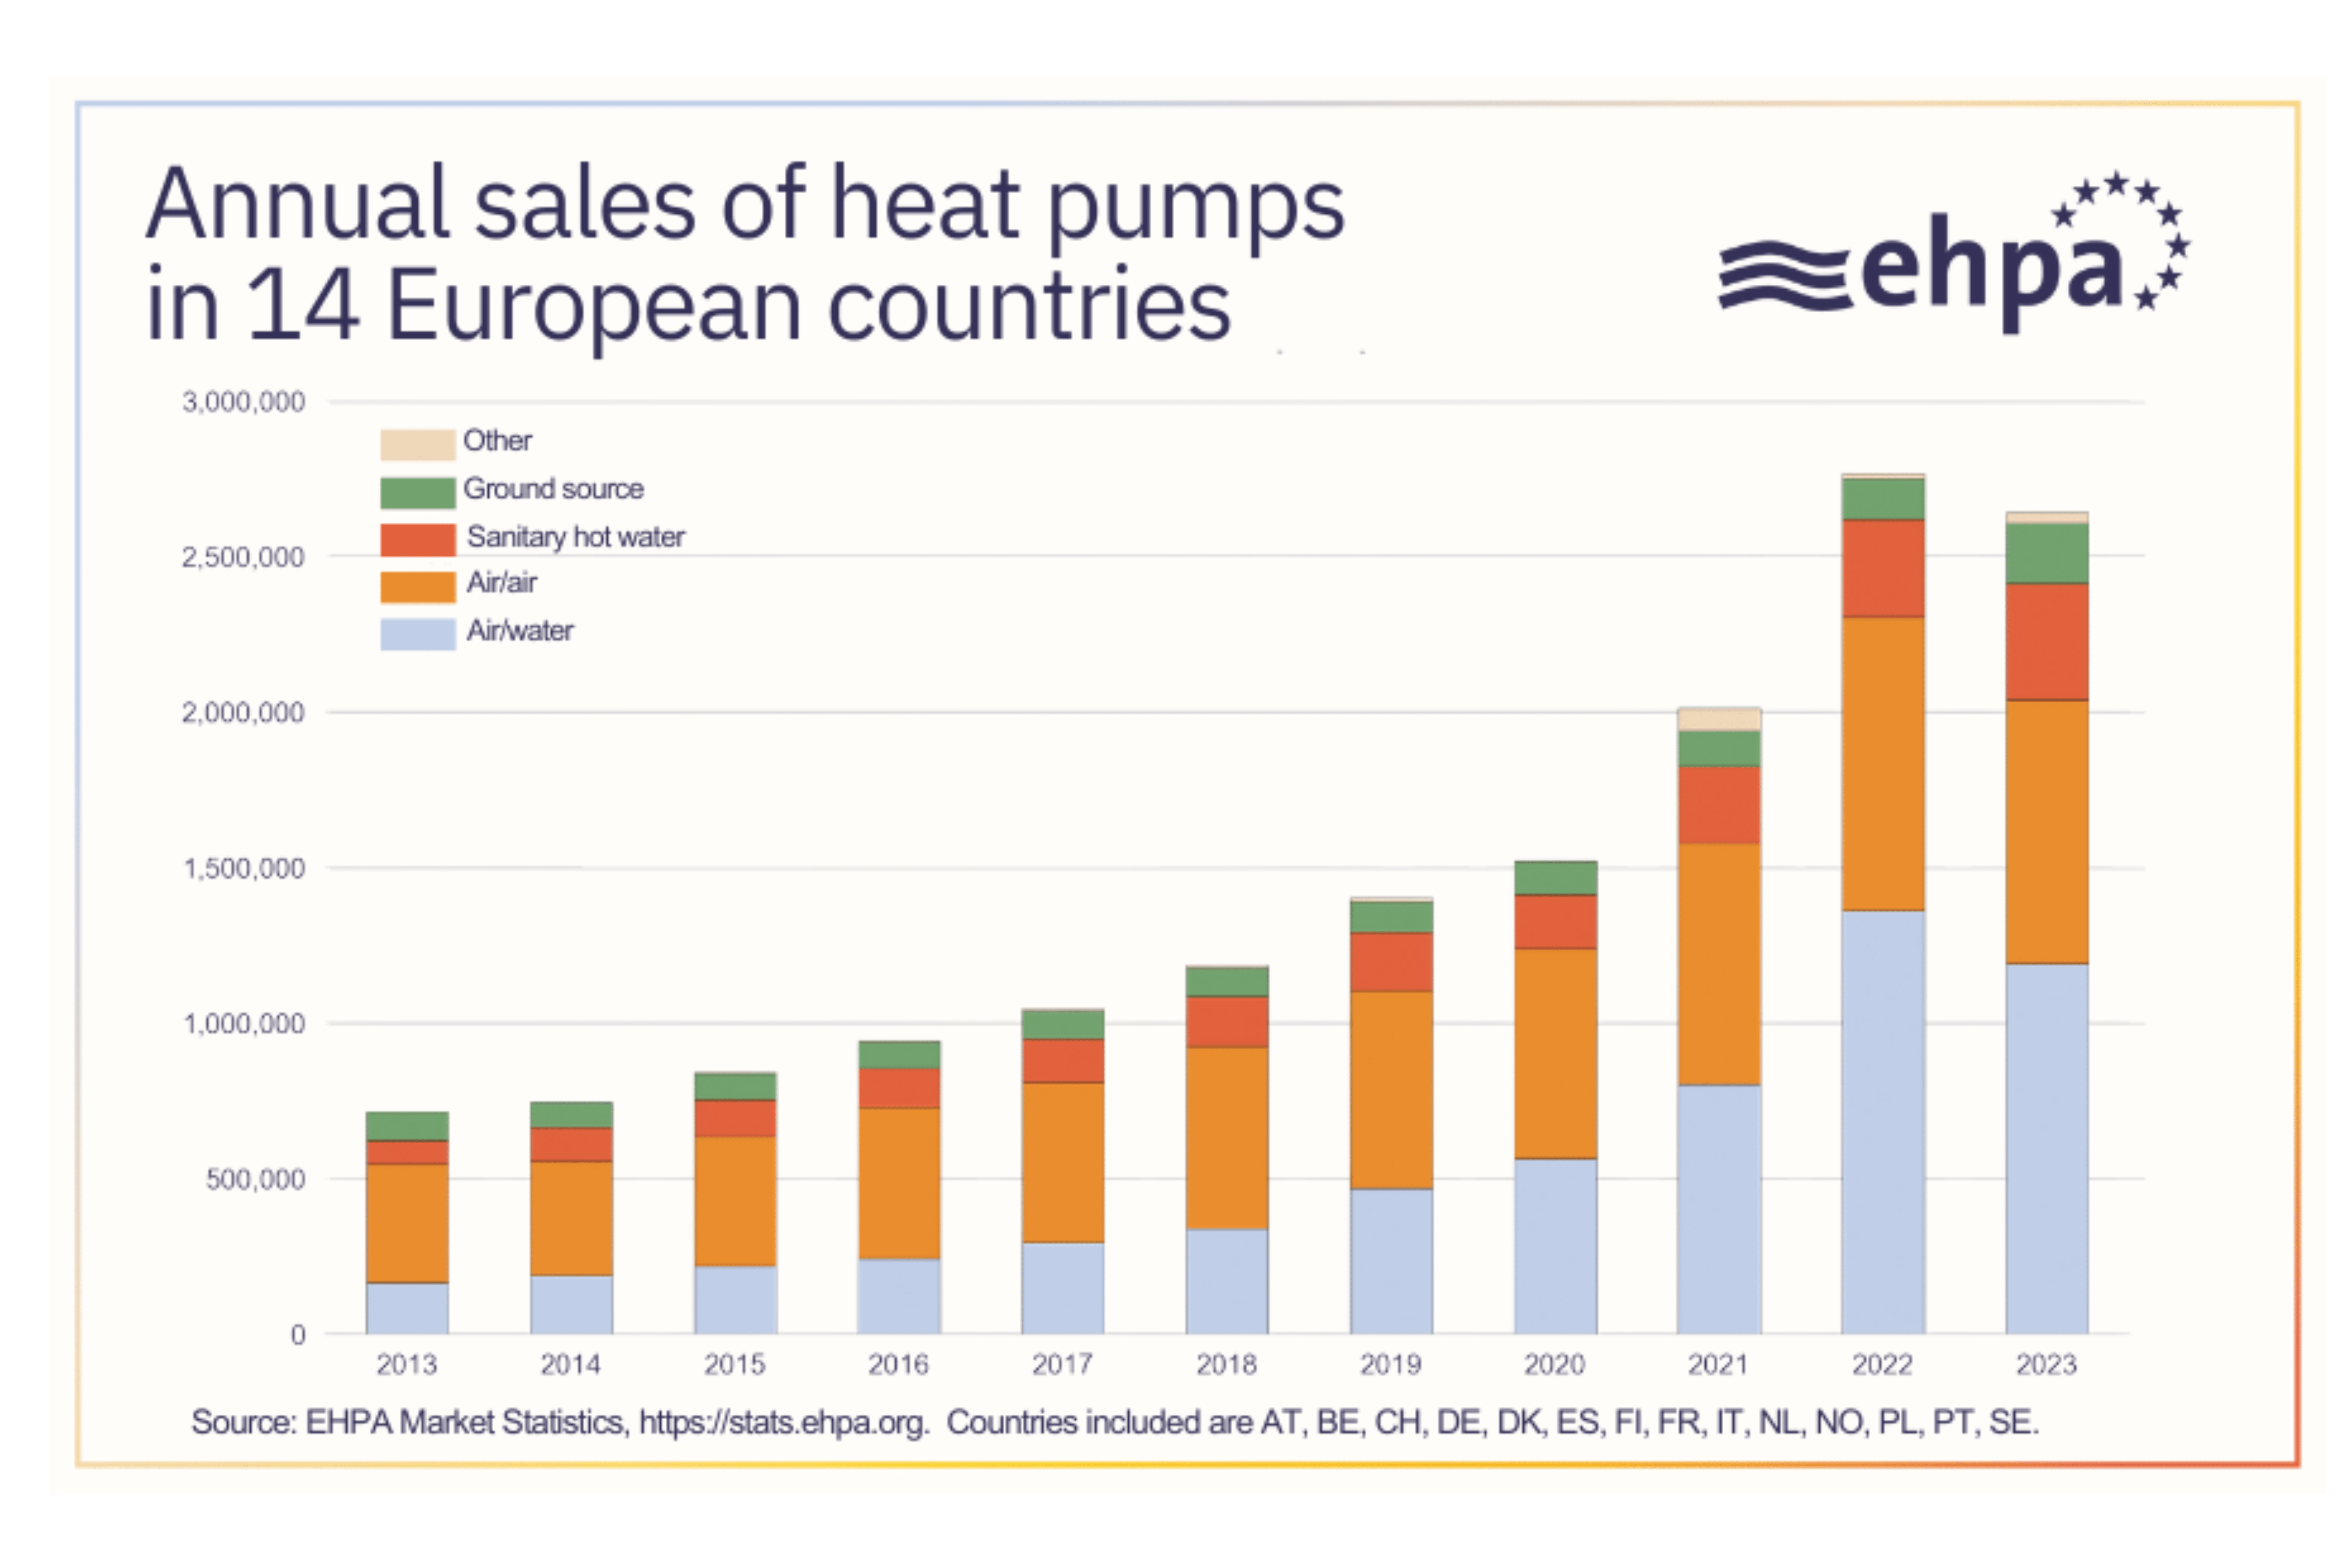 Heat pump sales in 14 European countries fell by around 5% overall in 2023 compared to 2022, from 2.77 million to 2.64 million.